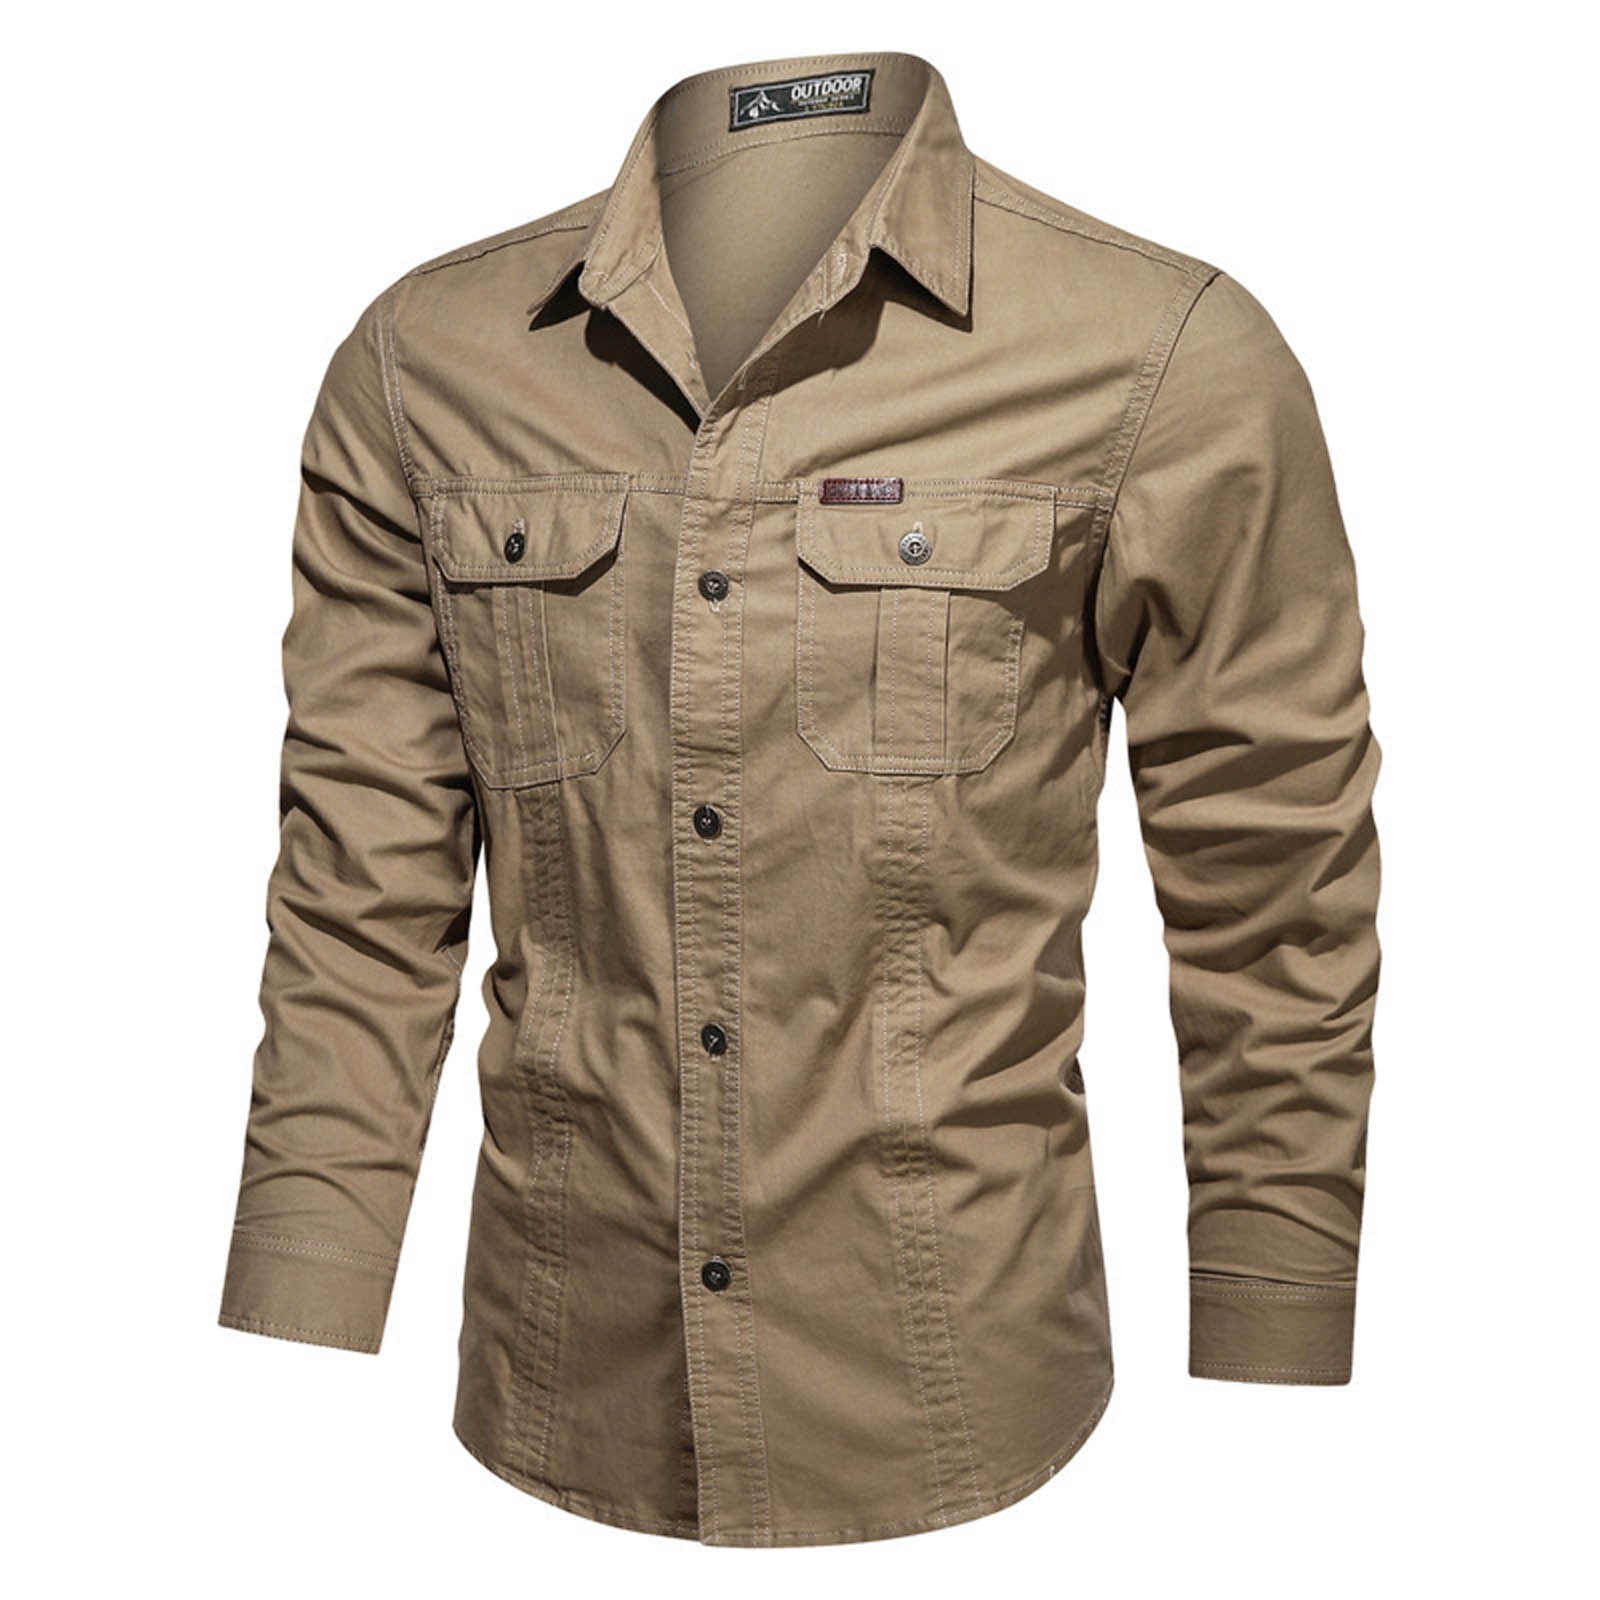 Men's Tactical Cargo Work Shirts Military Casual Button Up Slim